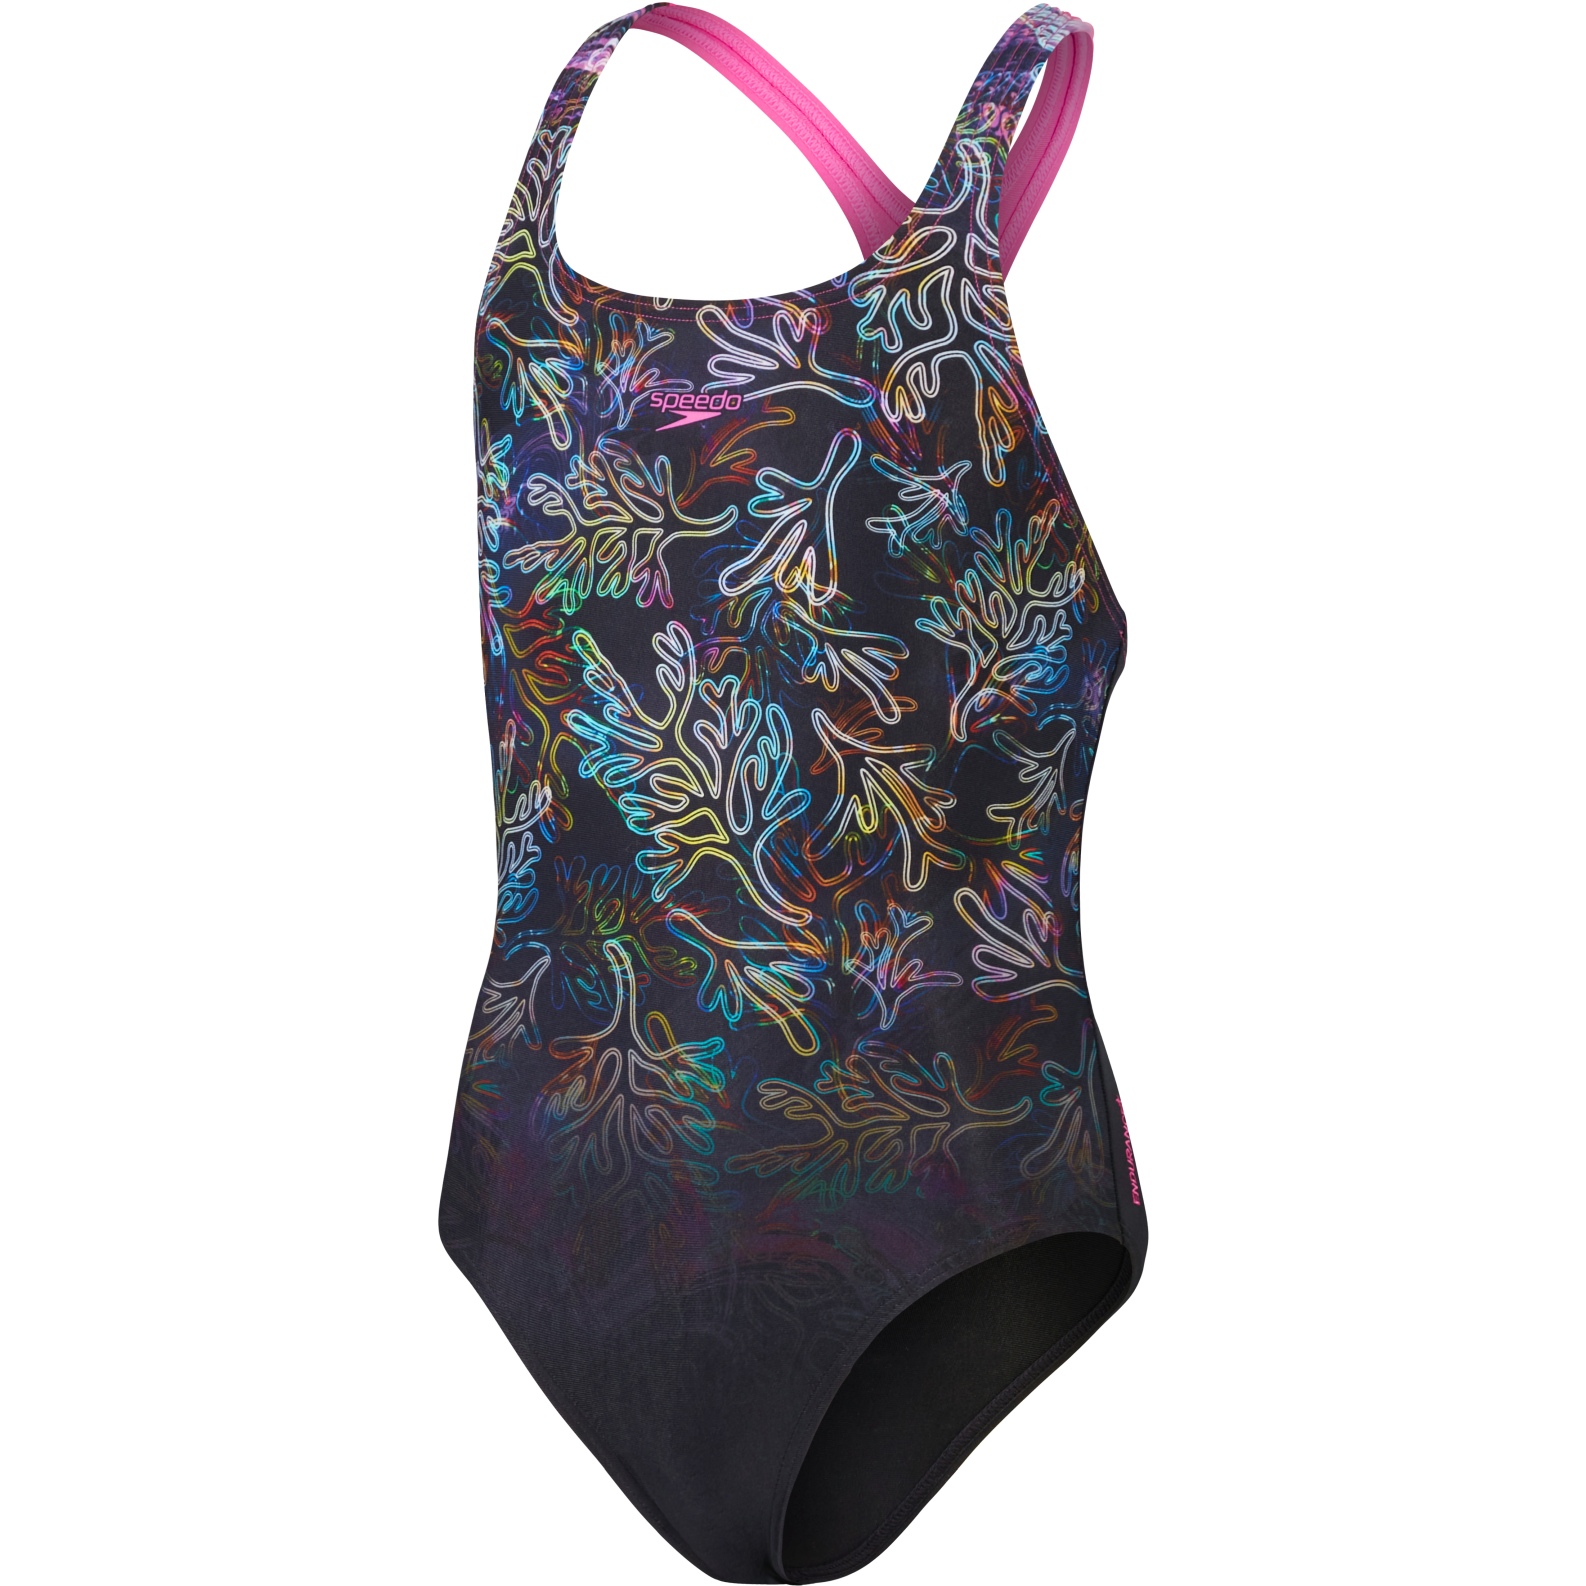 Picture of Speedo Digital Placement Medalist Swimsuit Girls - Black/Orchid Shine/Lemon Drizzle/Marine Blue/Hypersonic Blue